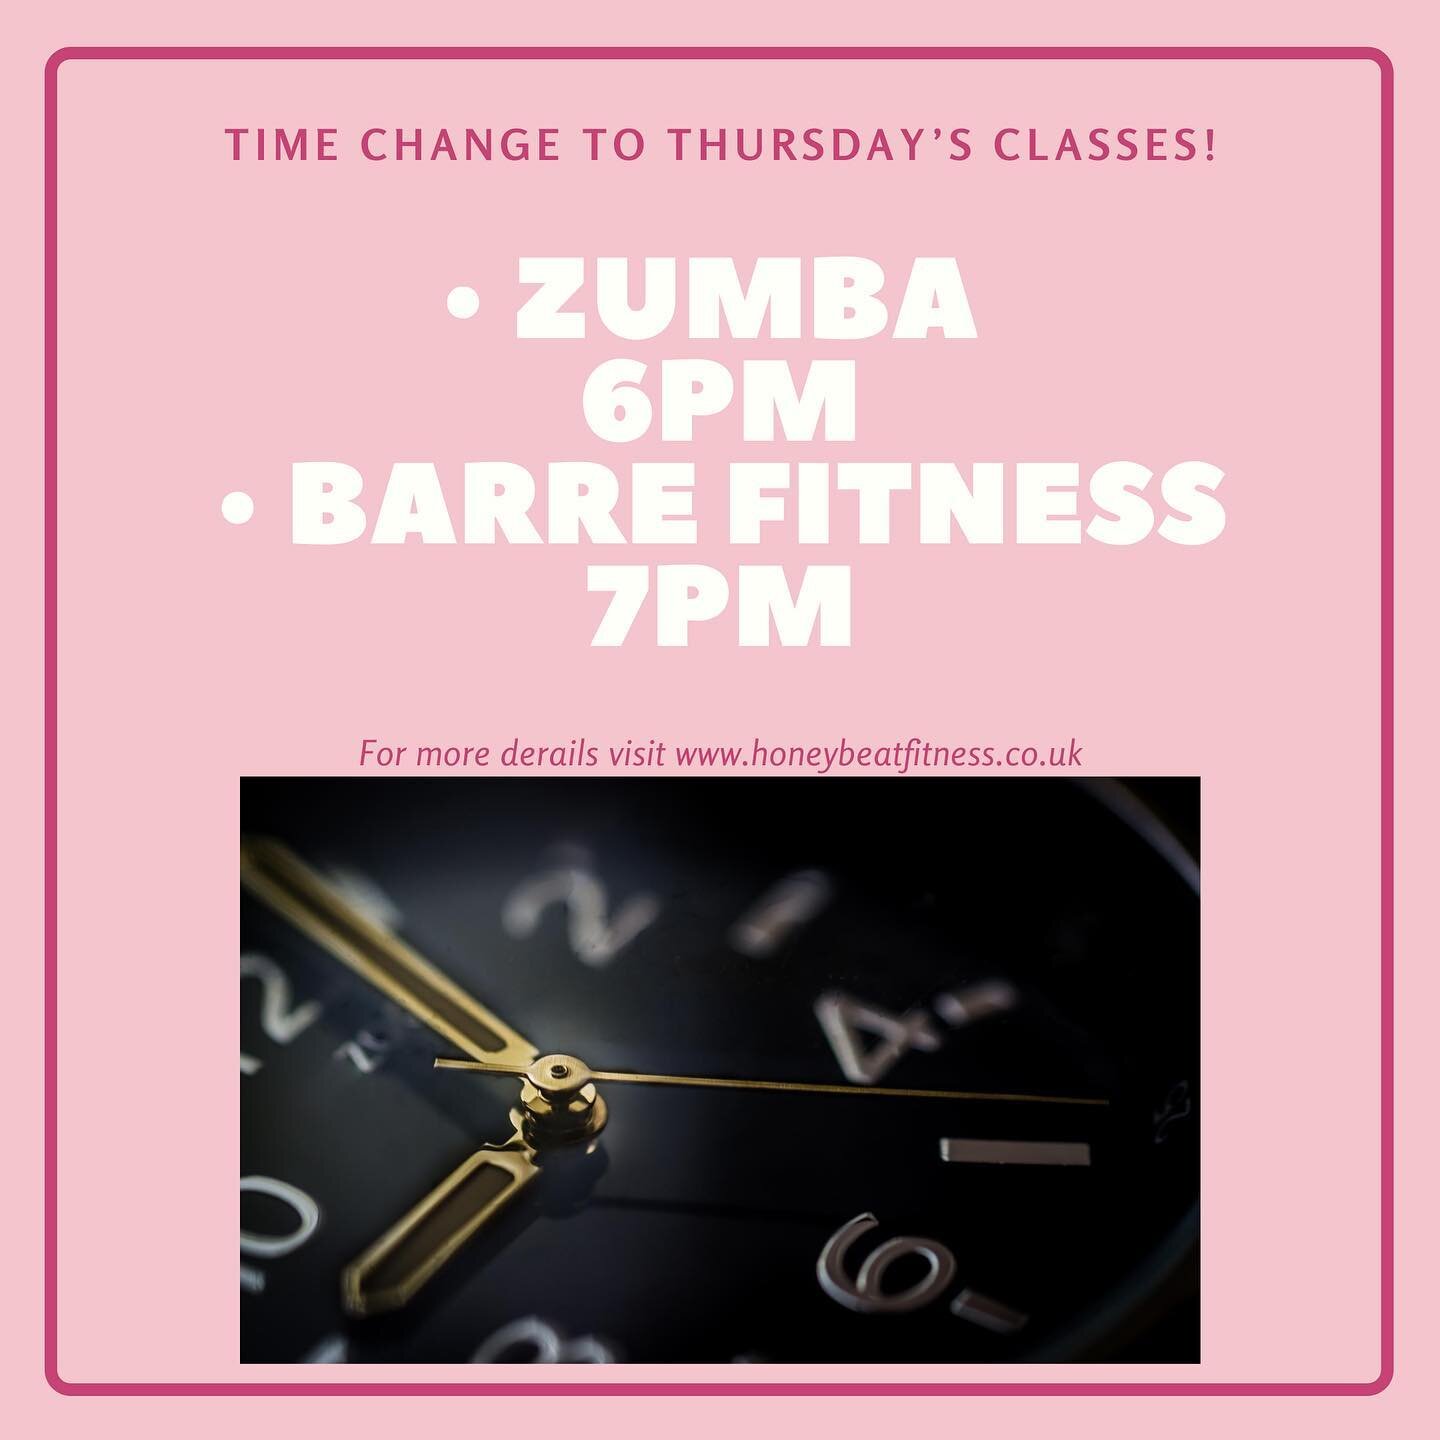 ** TIME CHANGE ANNOUNCEMENT **

Just to let everyone know we have a new time change to our online classes on Thursday&rsquo;s. 
Starting the week commencing 24th August, ALL Thursday&rsquo;s classes will now be at the following times:
&bull; ZUMBA 6p